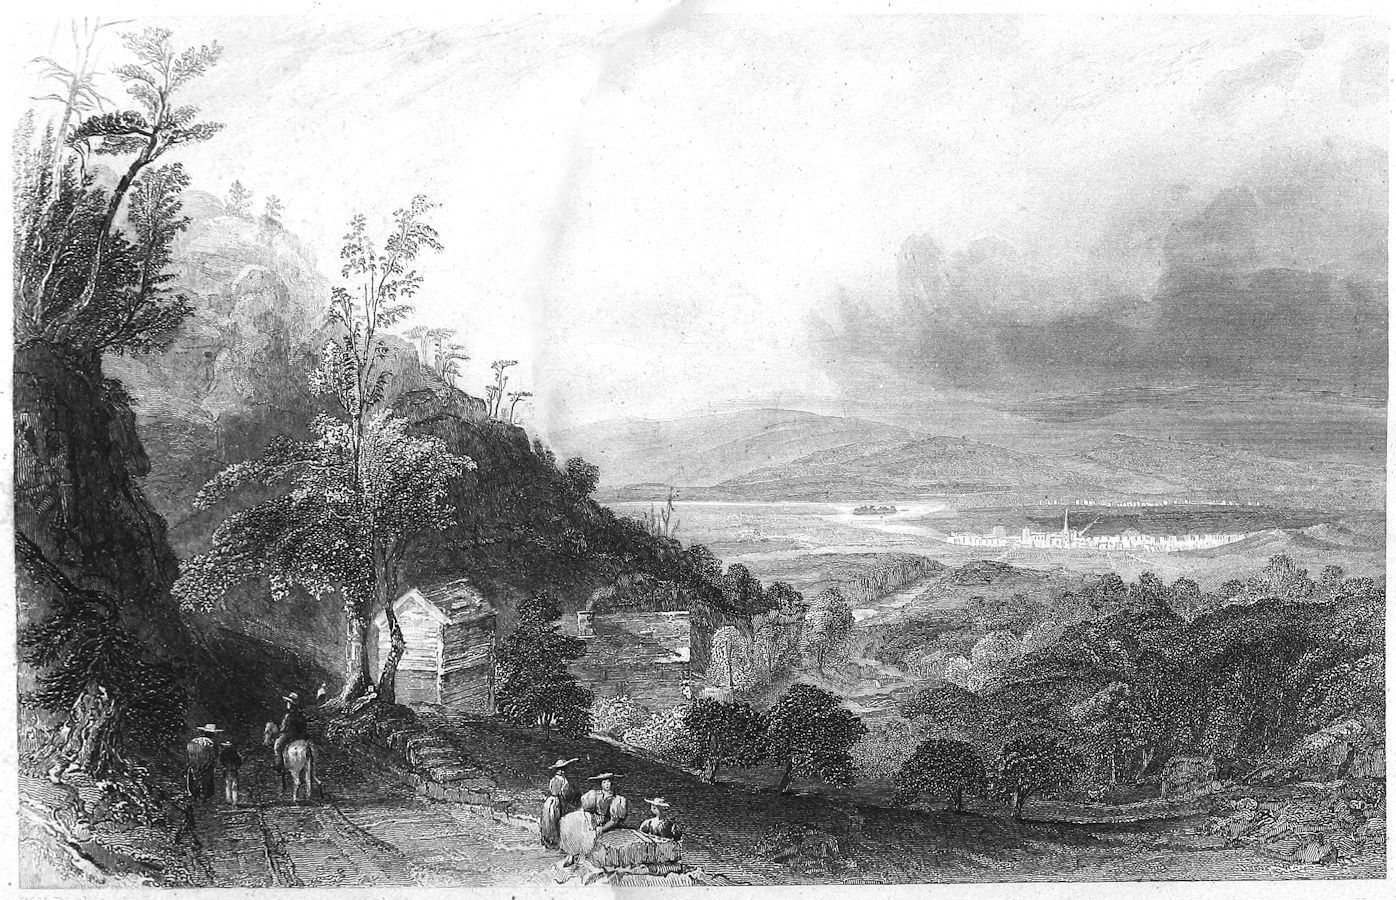 people on a hillside overlooking a valley